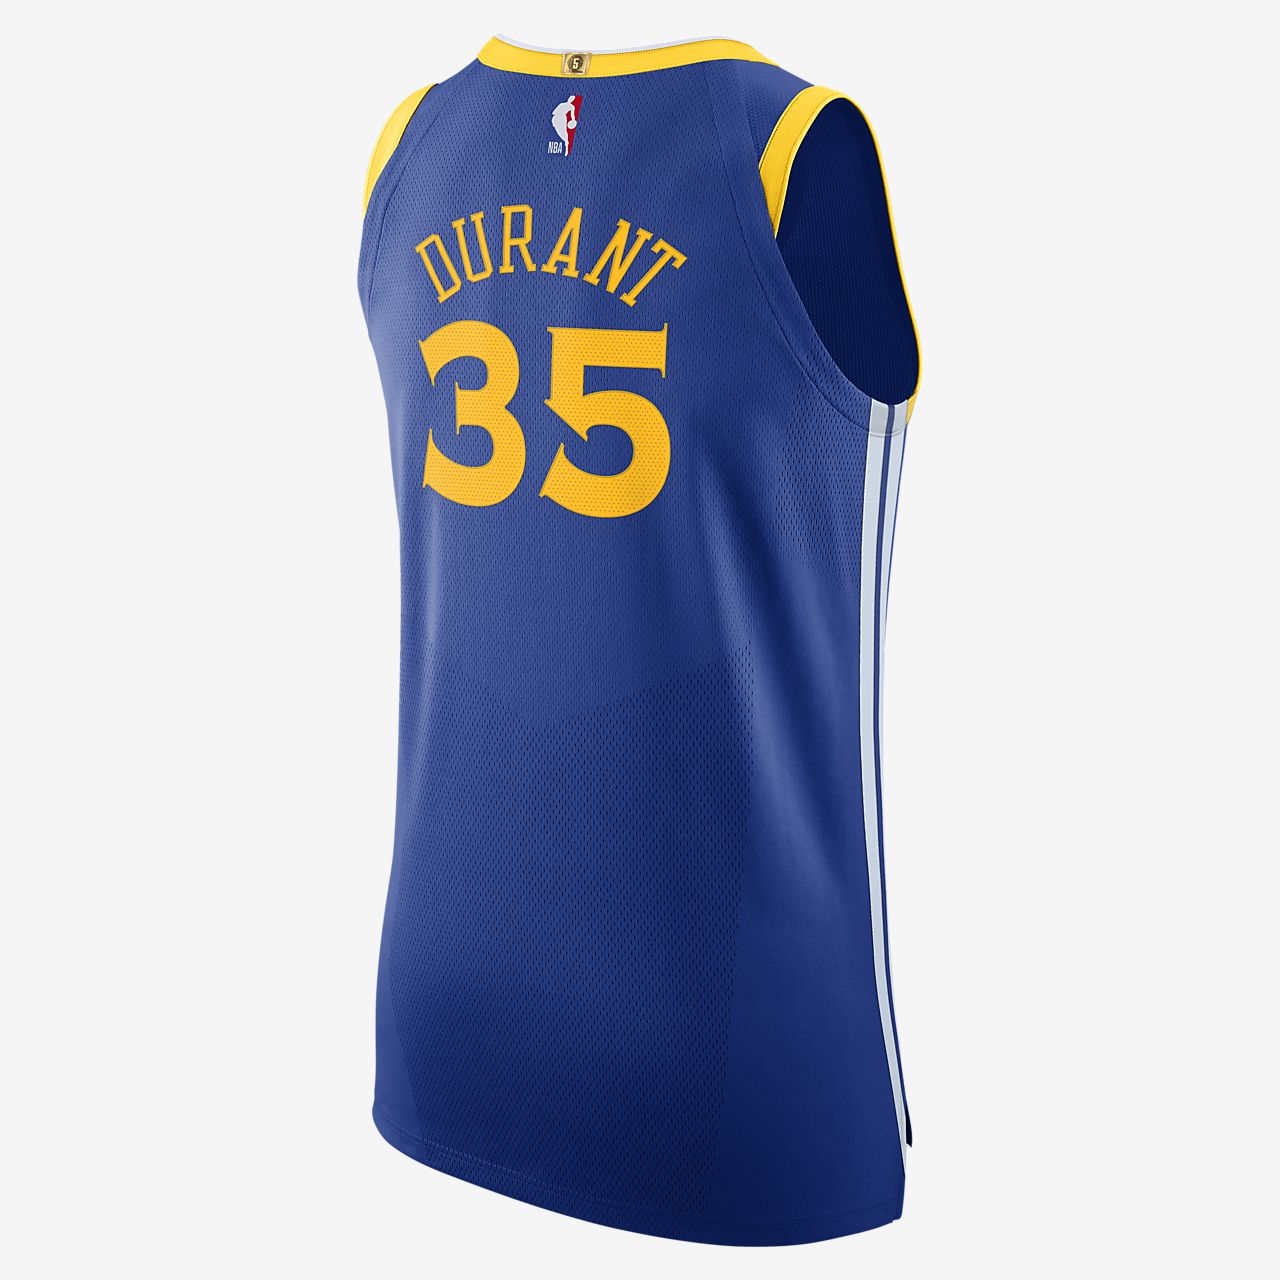 kevin durant official jersey